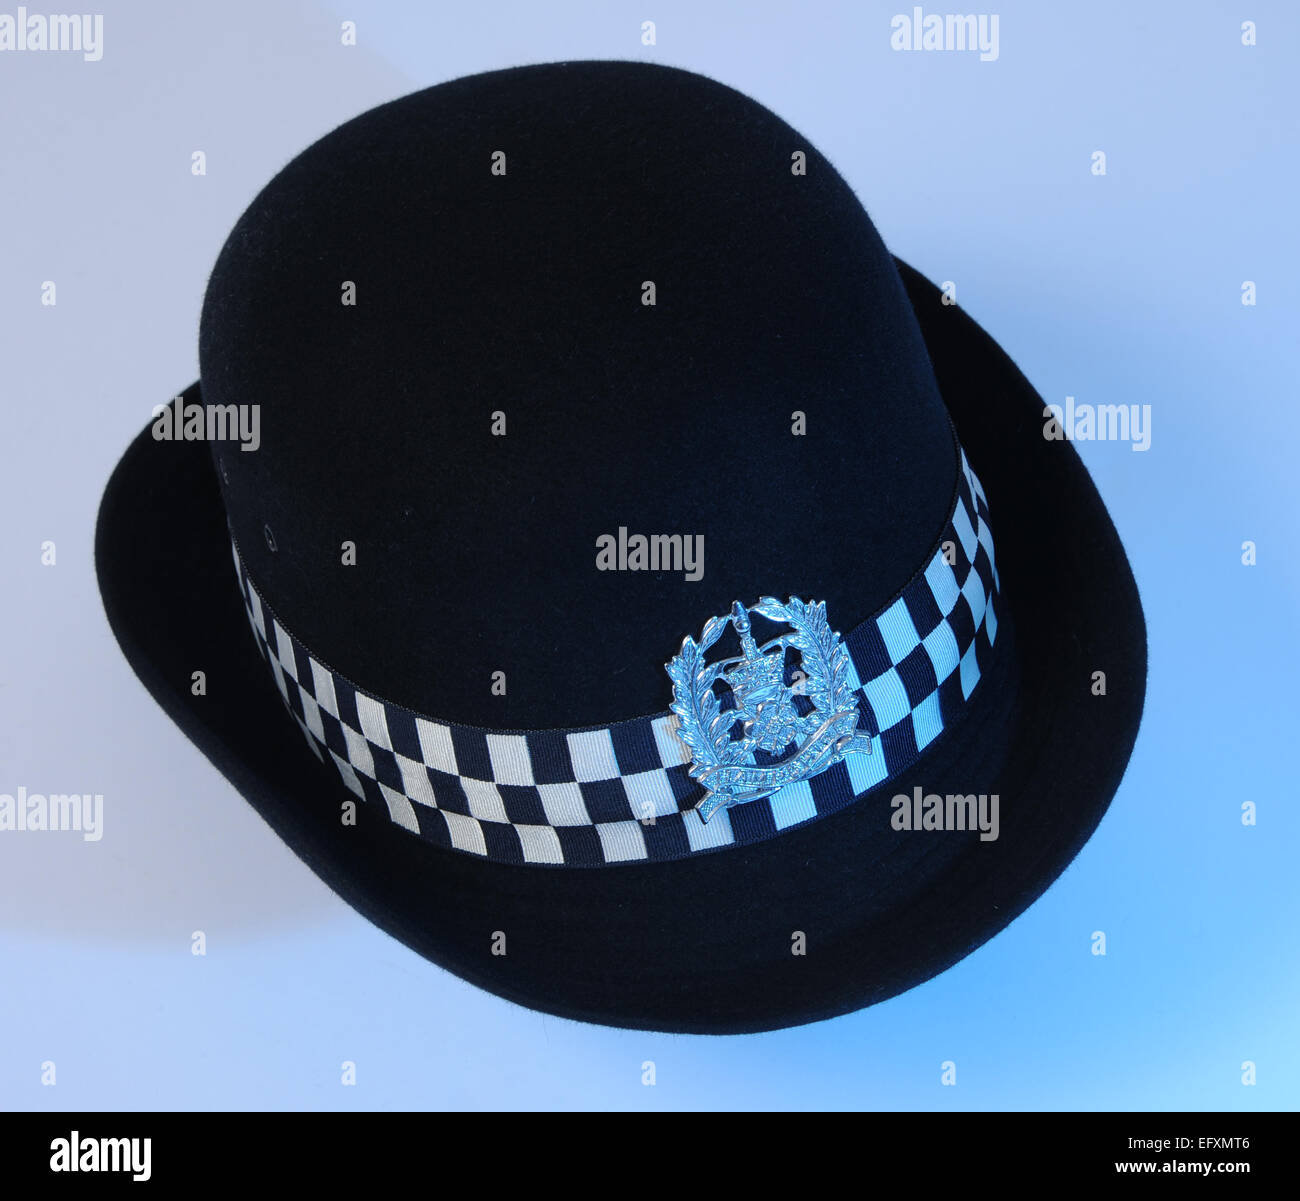 Policeman's uniform helmet with HAMPSHIRE police badge with blue fill light. Stock Photo